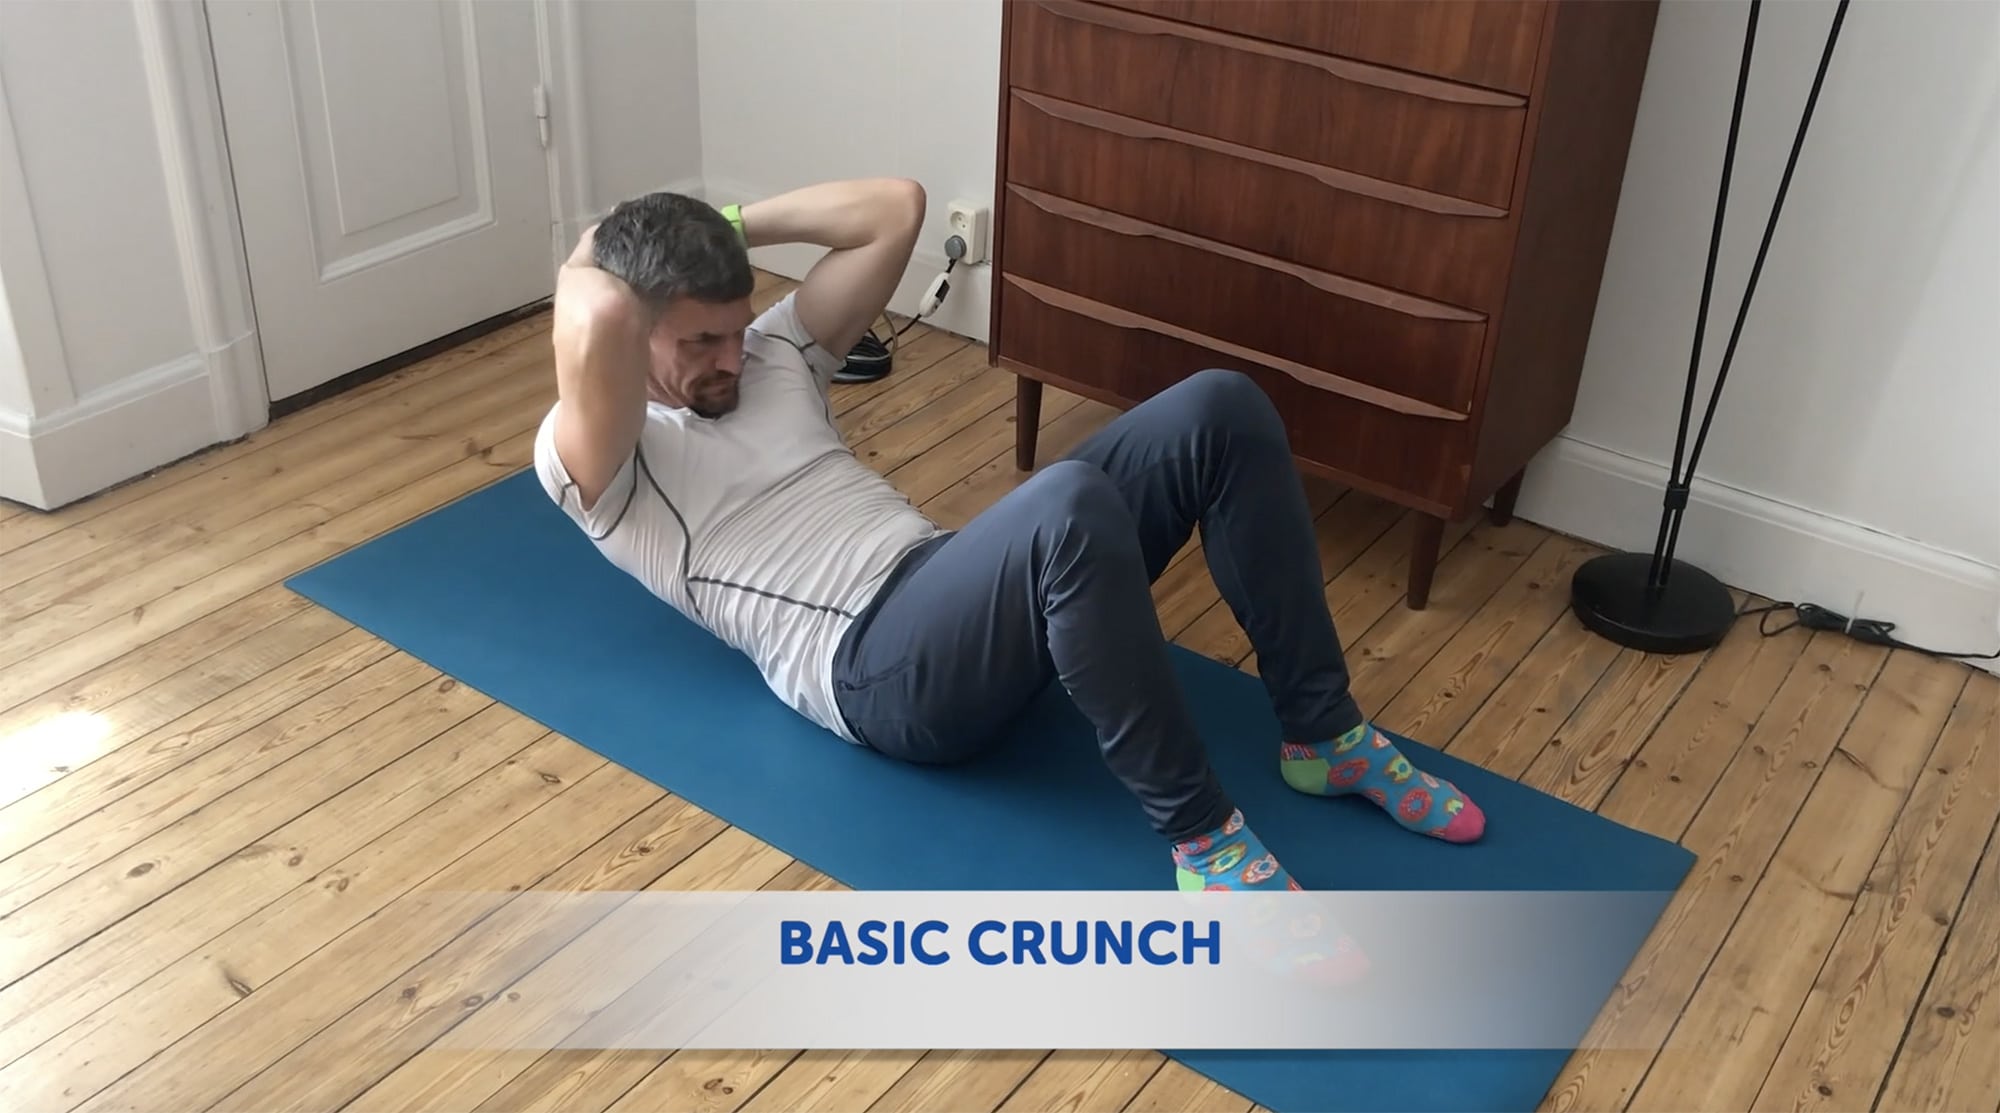 Hit your six-pack with crunches